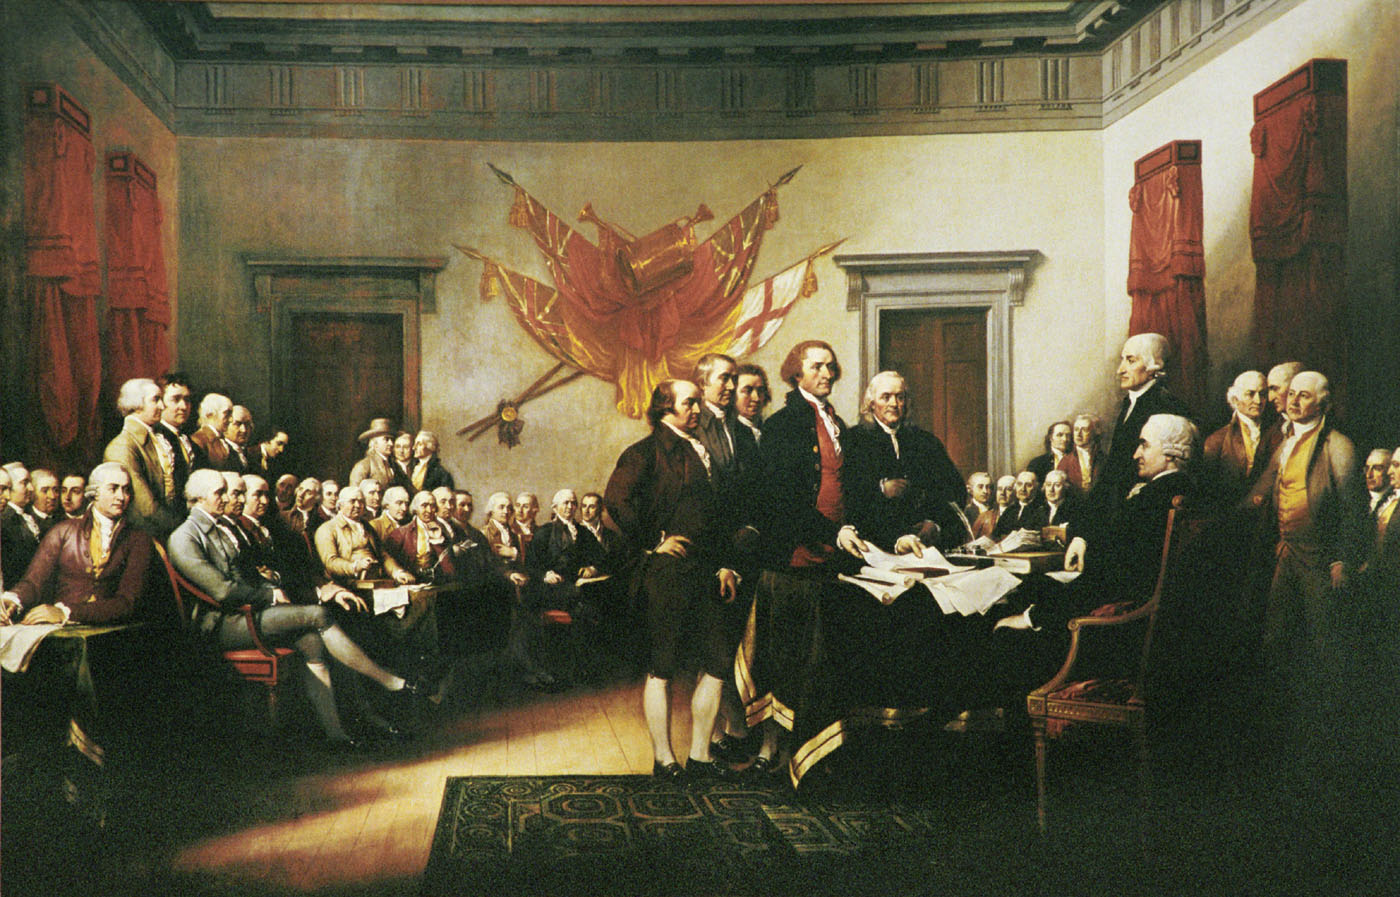 Drawing of the Declaration of Independence free image download